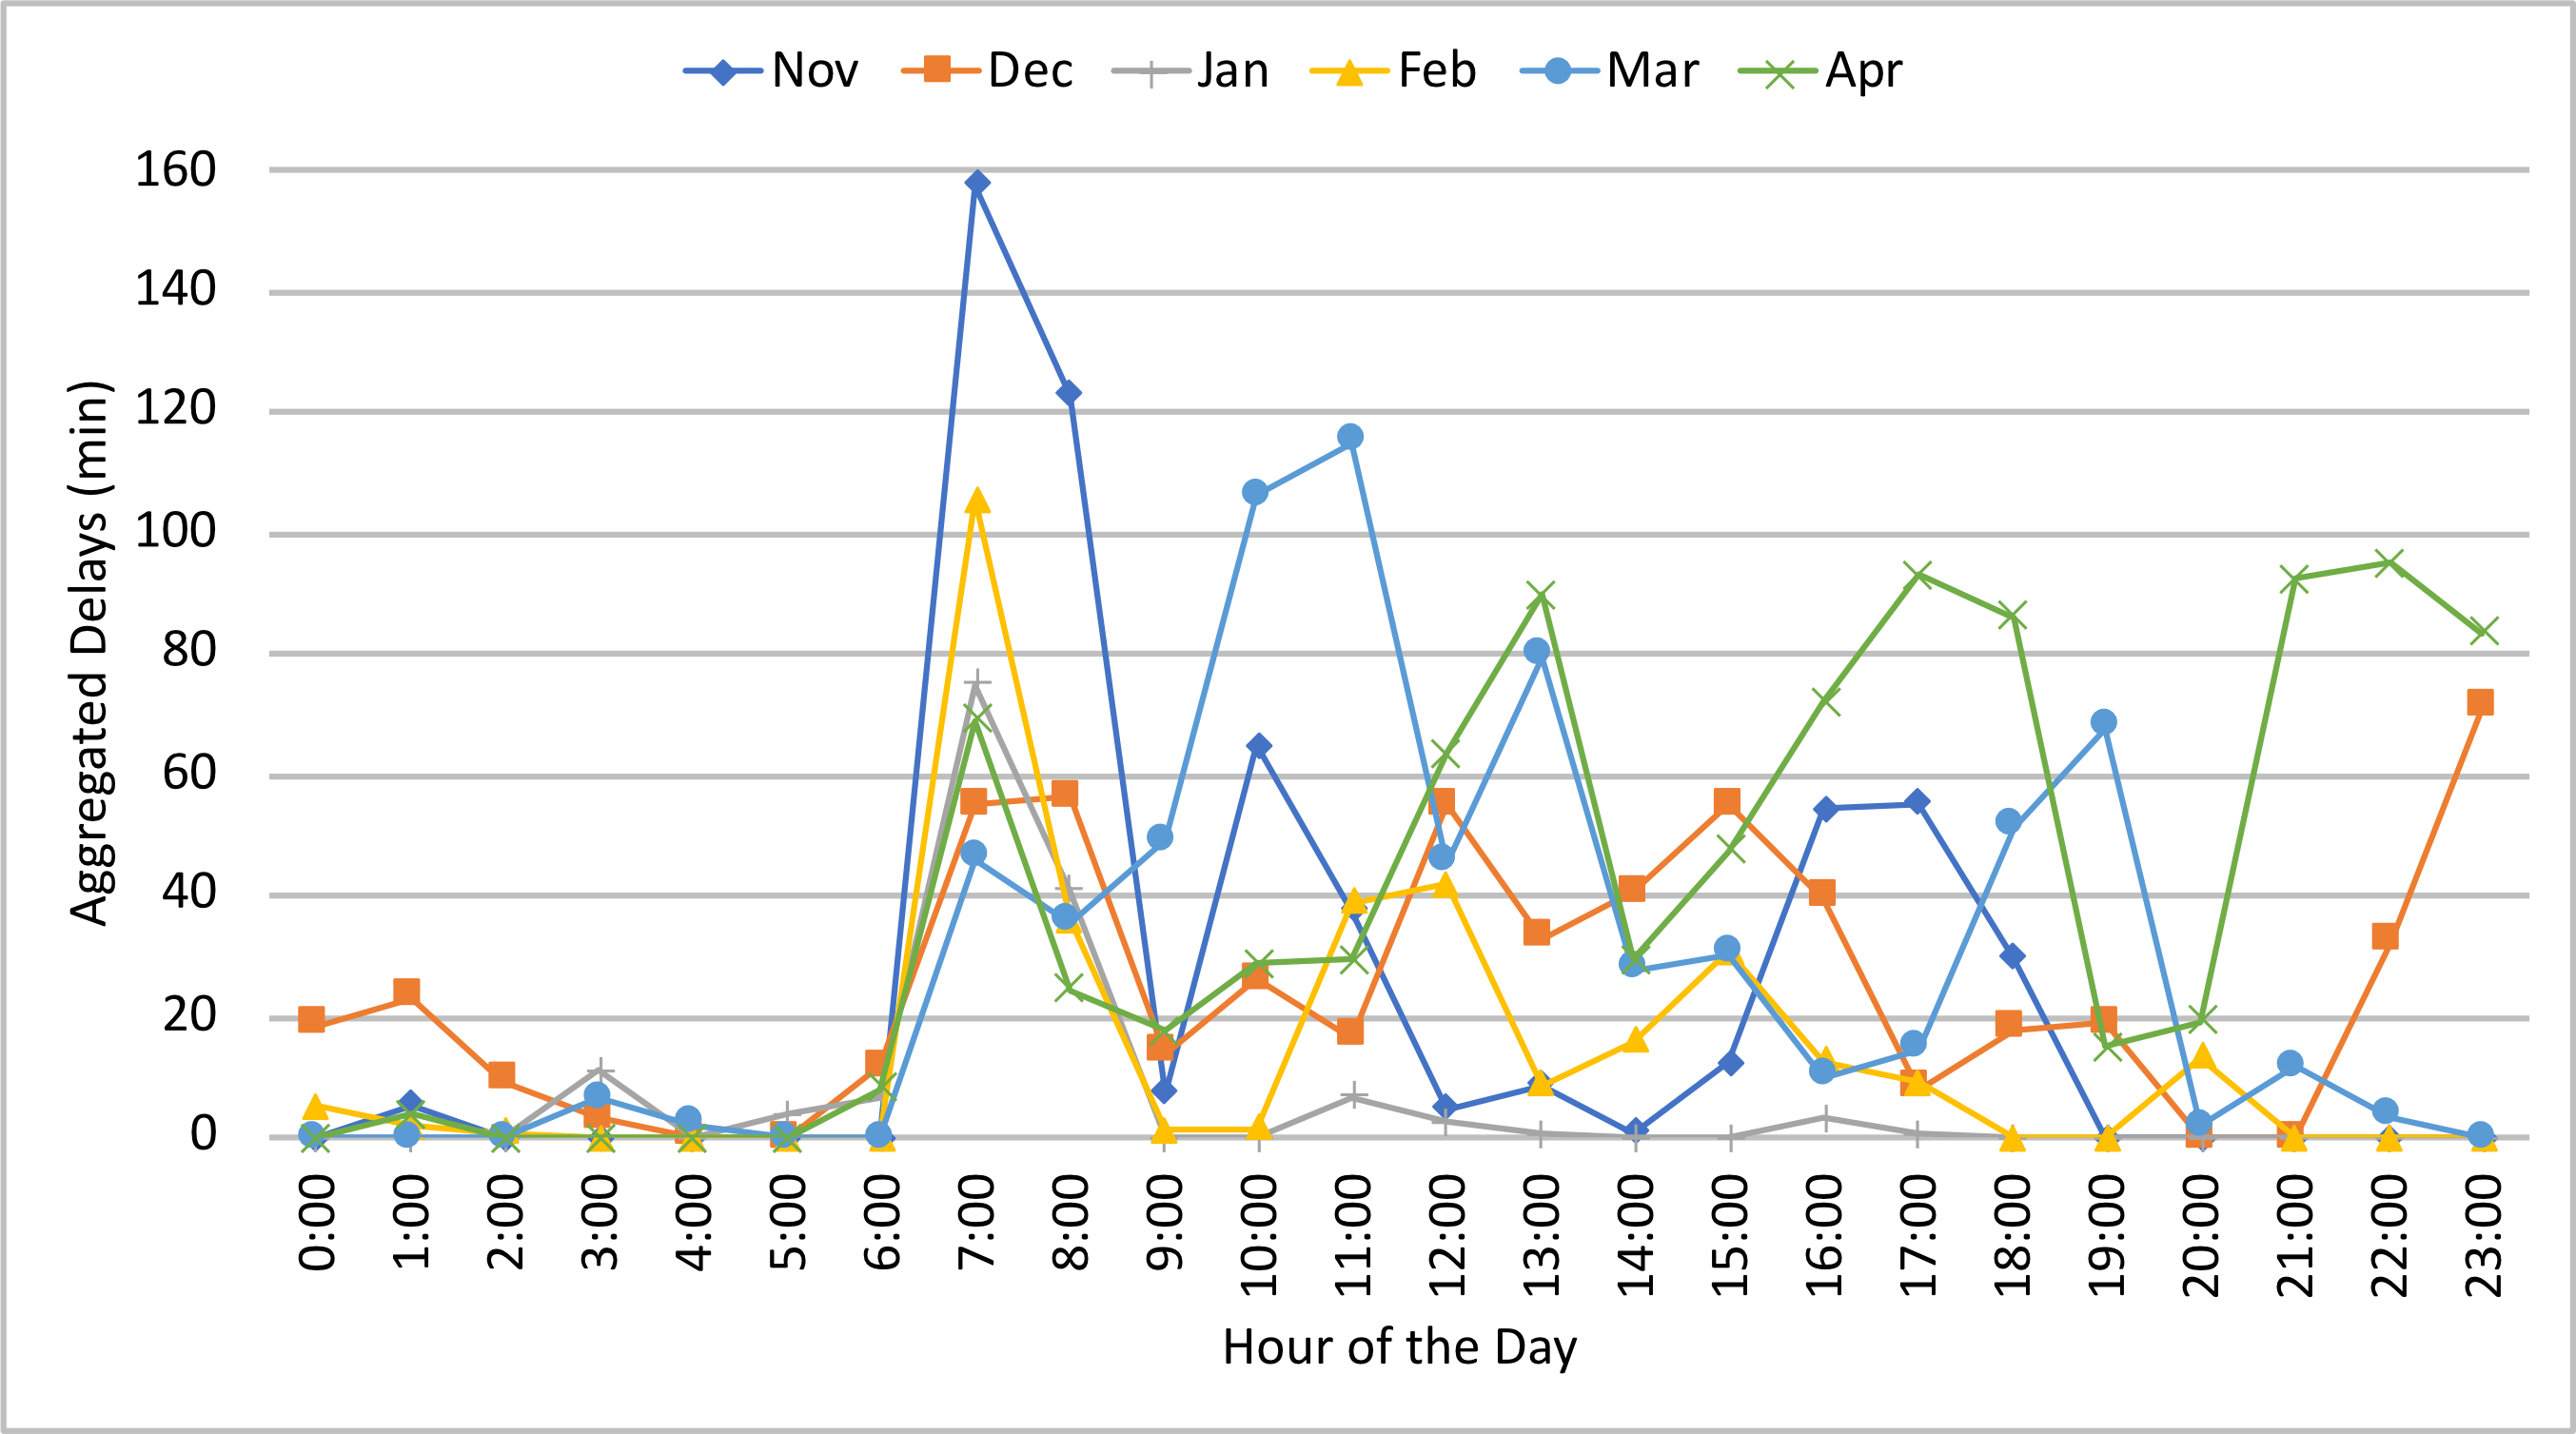 A line graph is shown for aggregated delay by hour of day for each month between November and April. Units are in minutes.  Delays range from about 0 to 160, with most of them between 0 and 40.  Delays are lowest between midnight and 6:00 AM and highest between 6:00 AM and 8:00 AM.